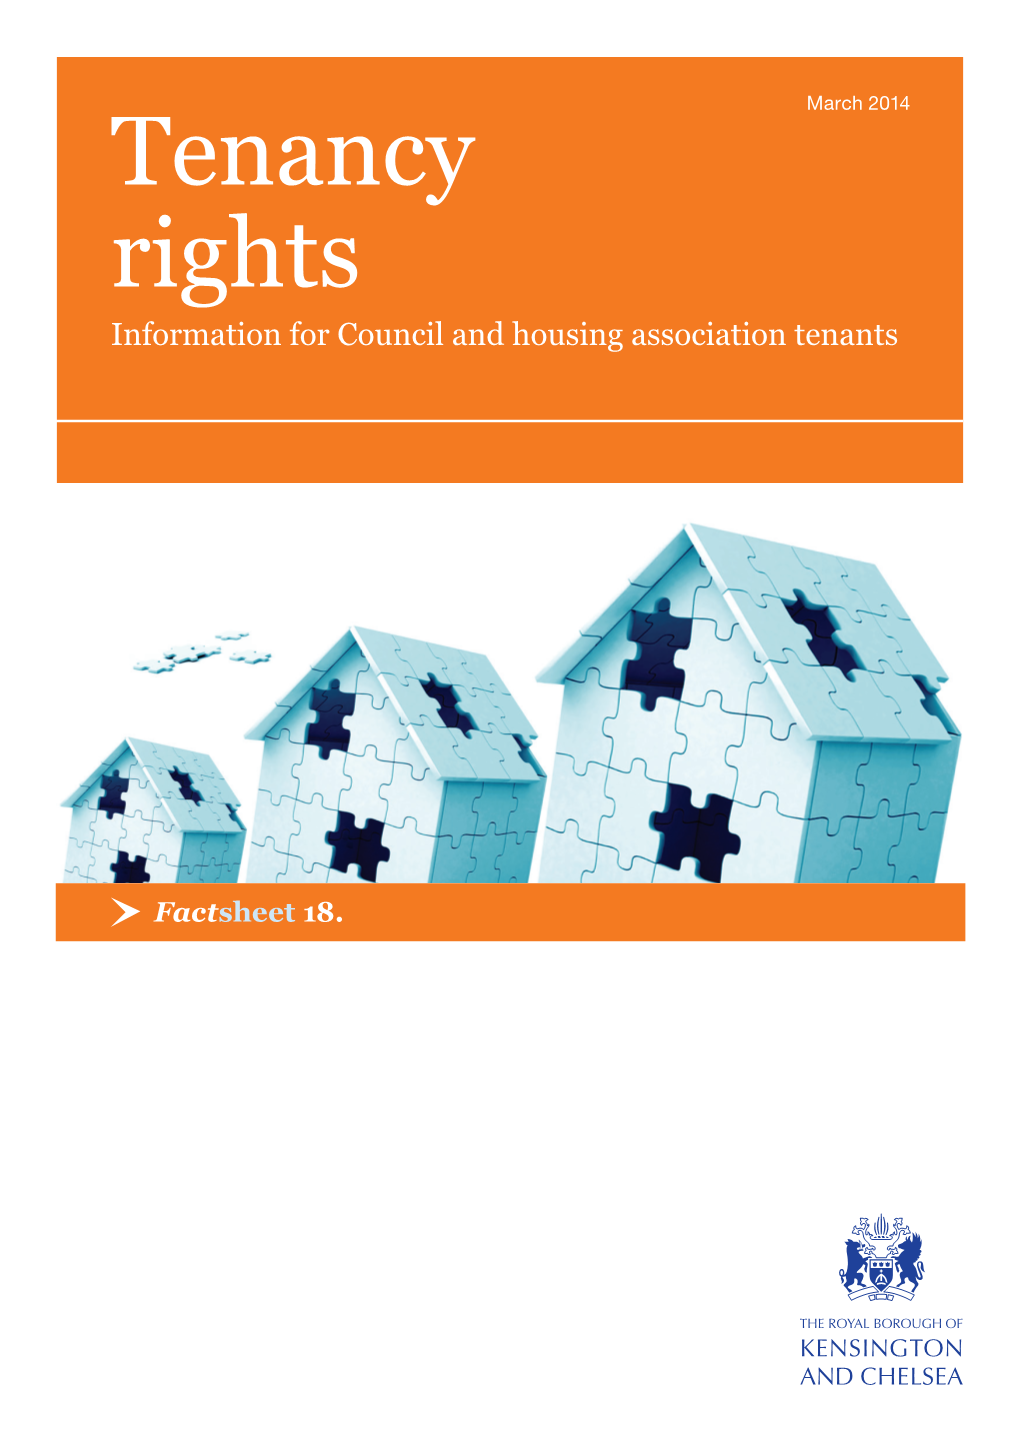 Tenancy Rights Information for Council and Housing Association Tenants